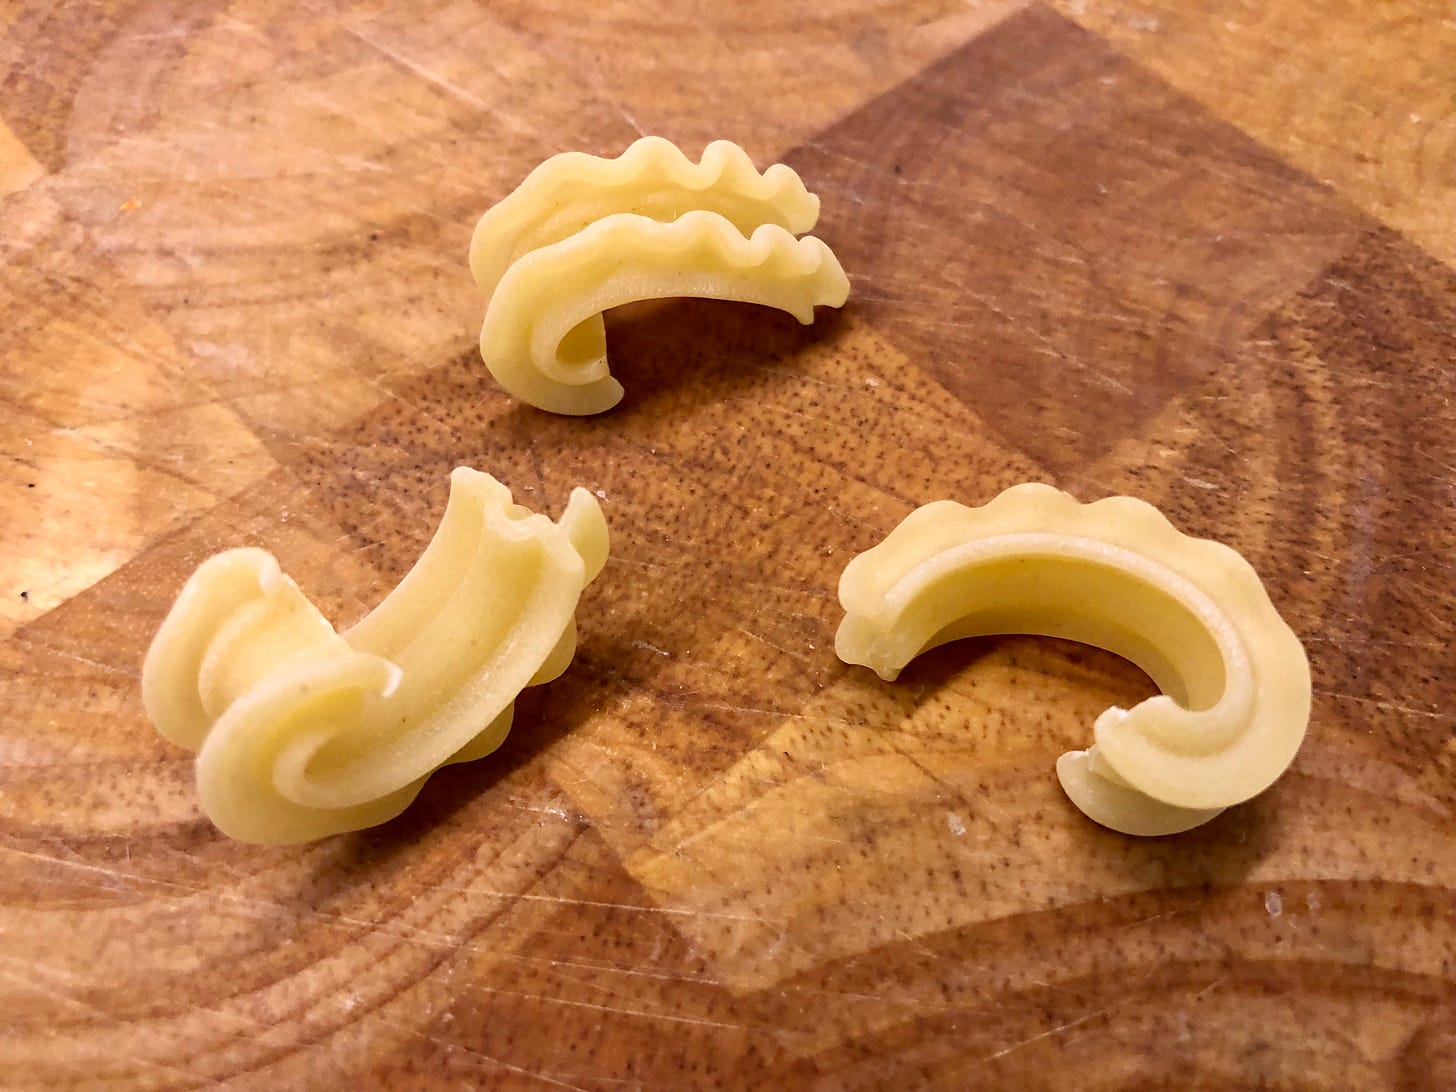 Three uncooked cascatelli. They are short, curly cut pasta. On the back of each curl there is a pair of ruffles that runs the length of the noodles, forming a kind of trough or channel.